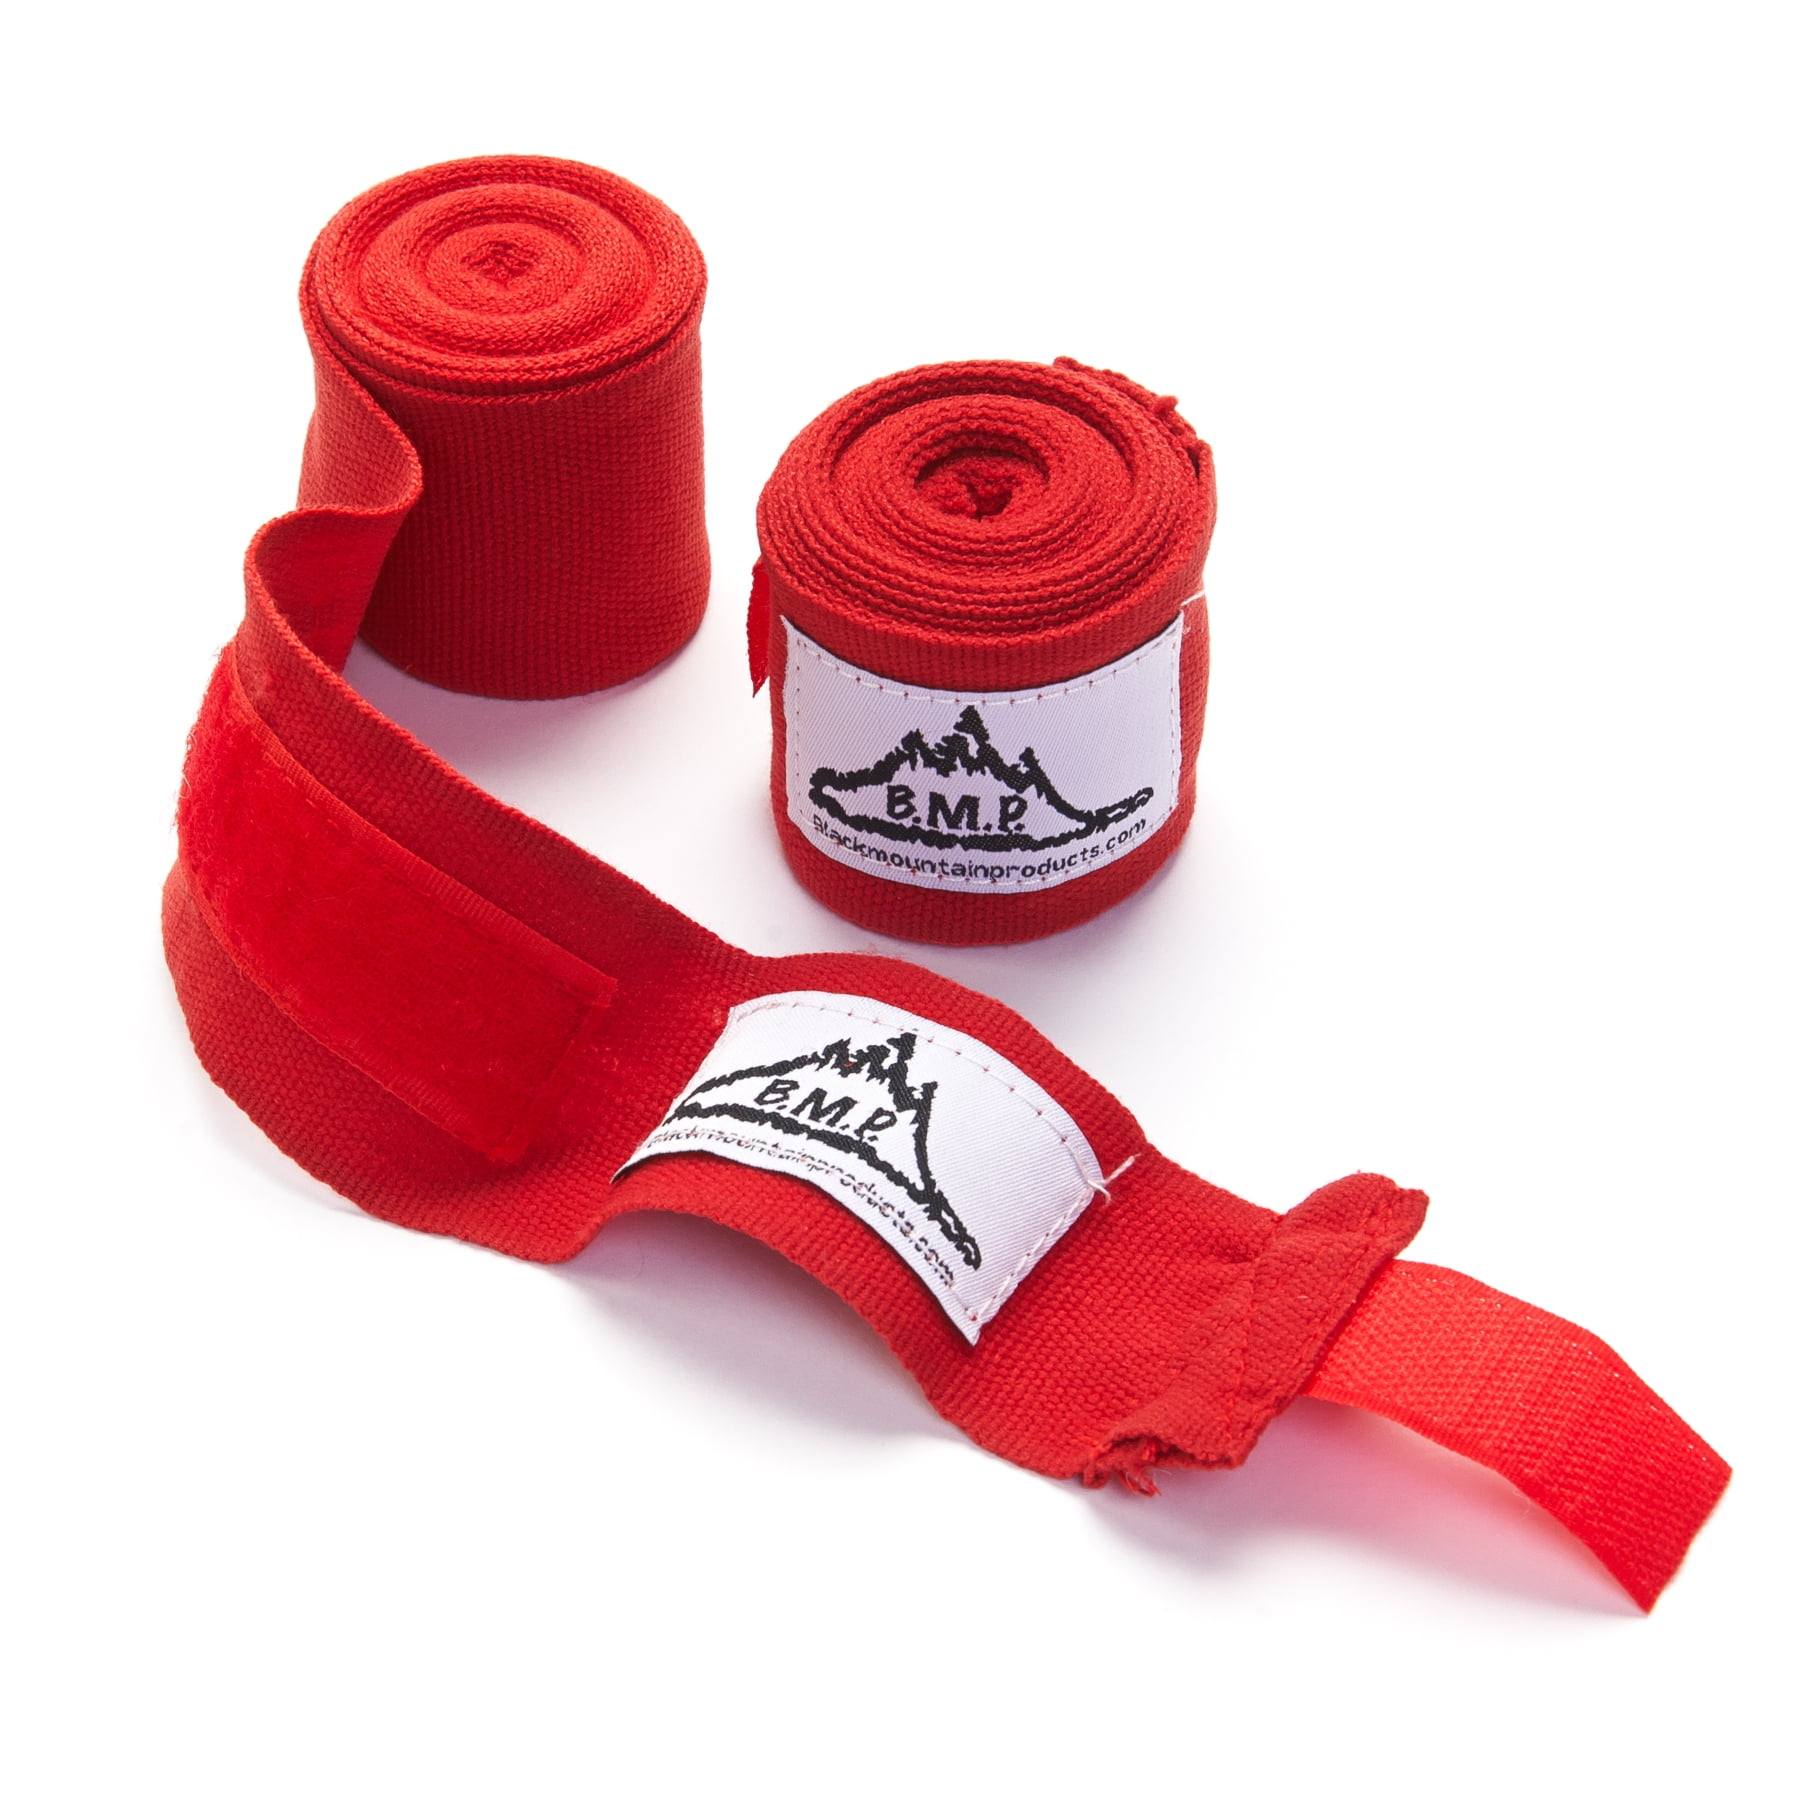 MEISTER MMA Boxing Quick Pen Handwraps NEW FITS ALL PORTABLE HAND WRAP ROLLER 